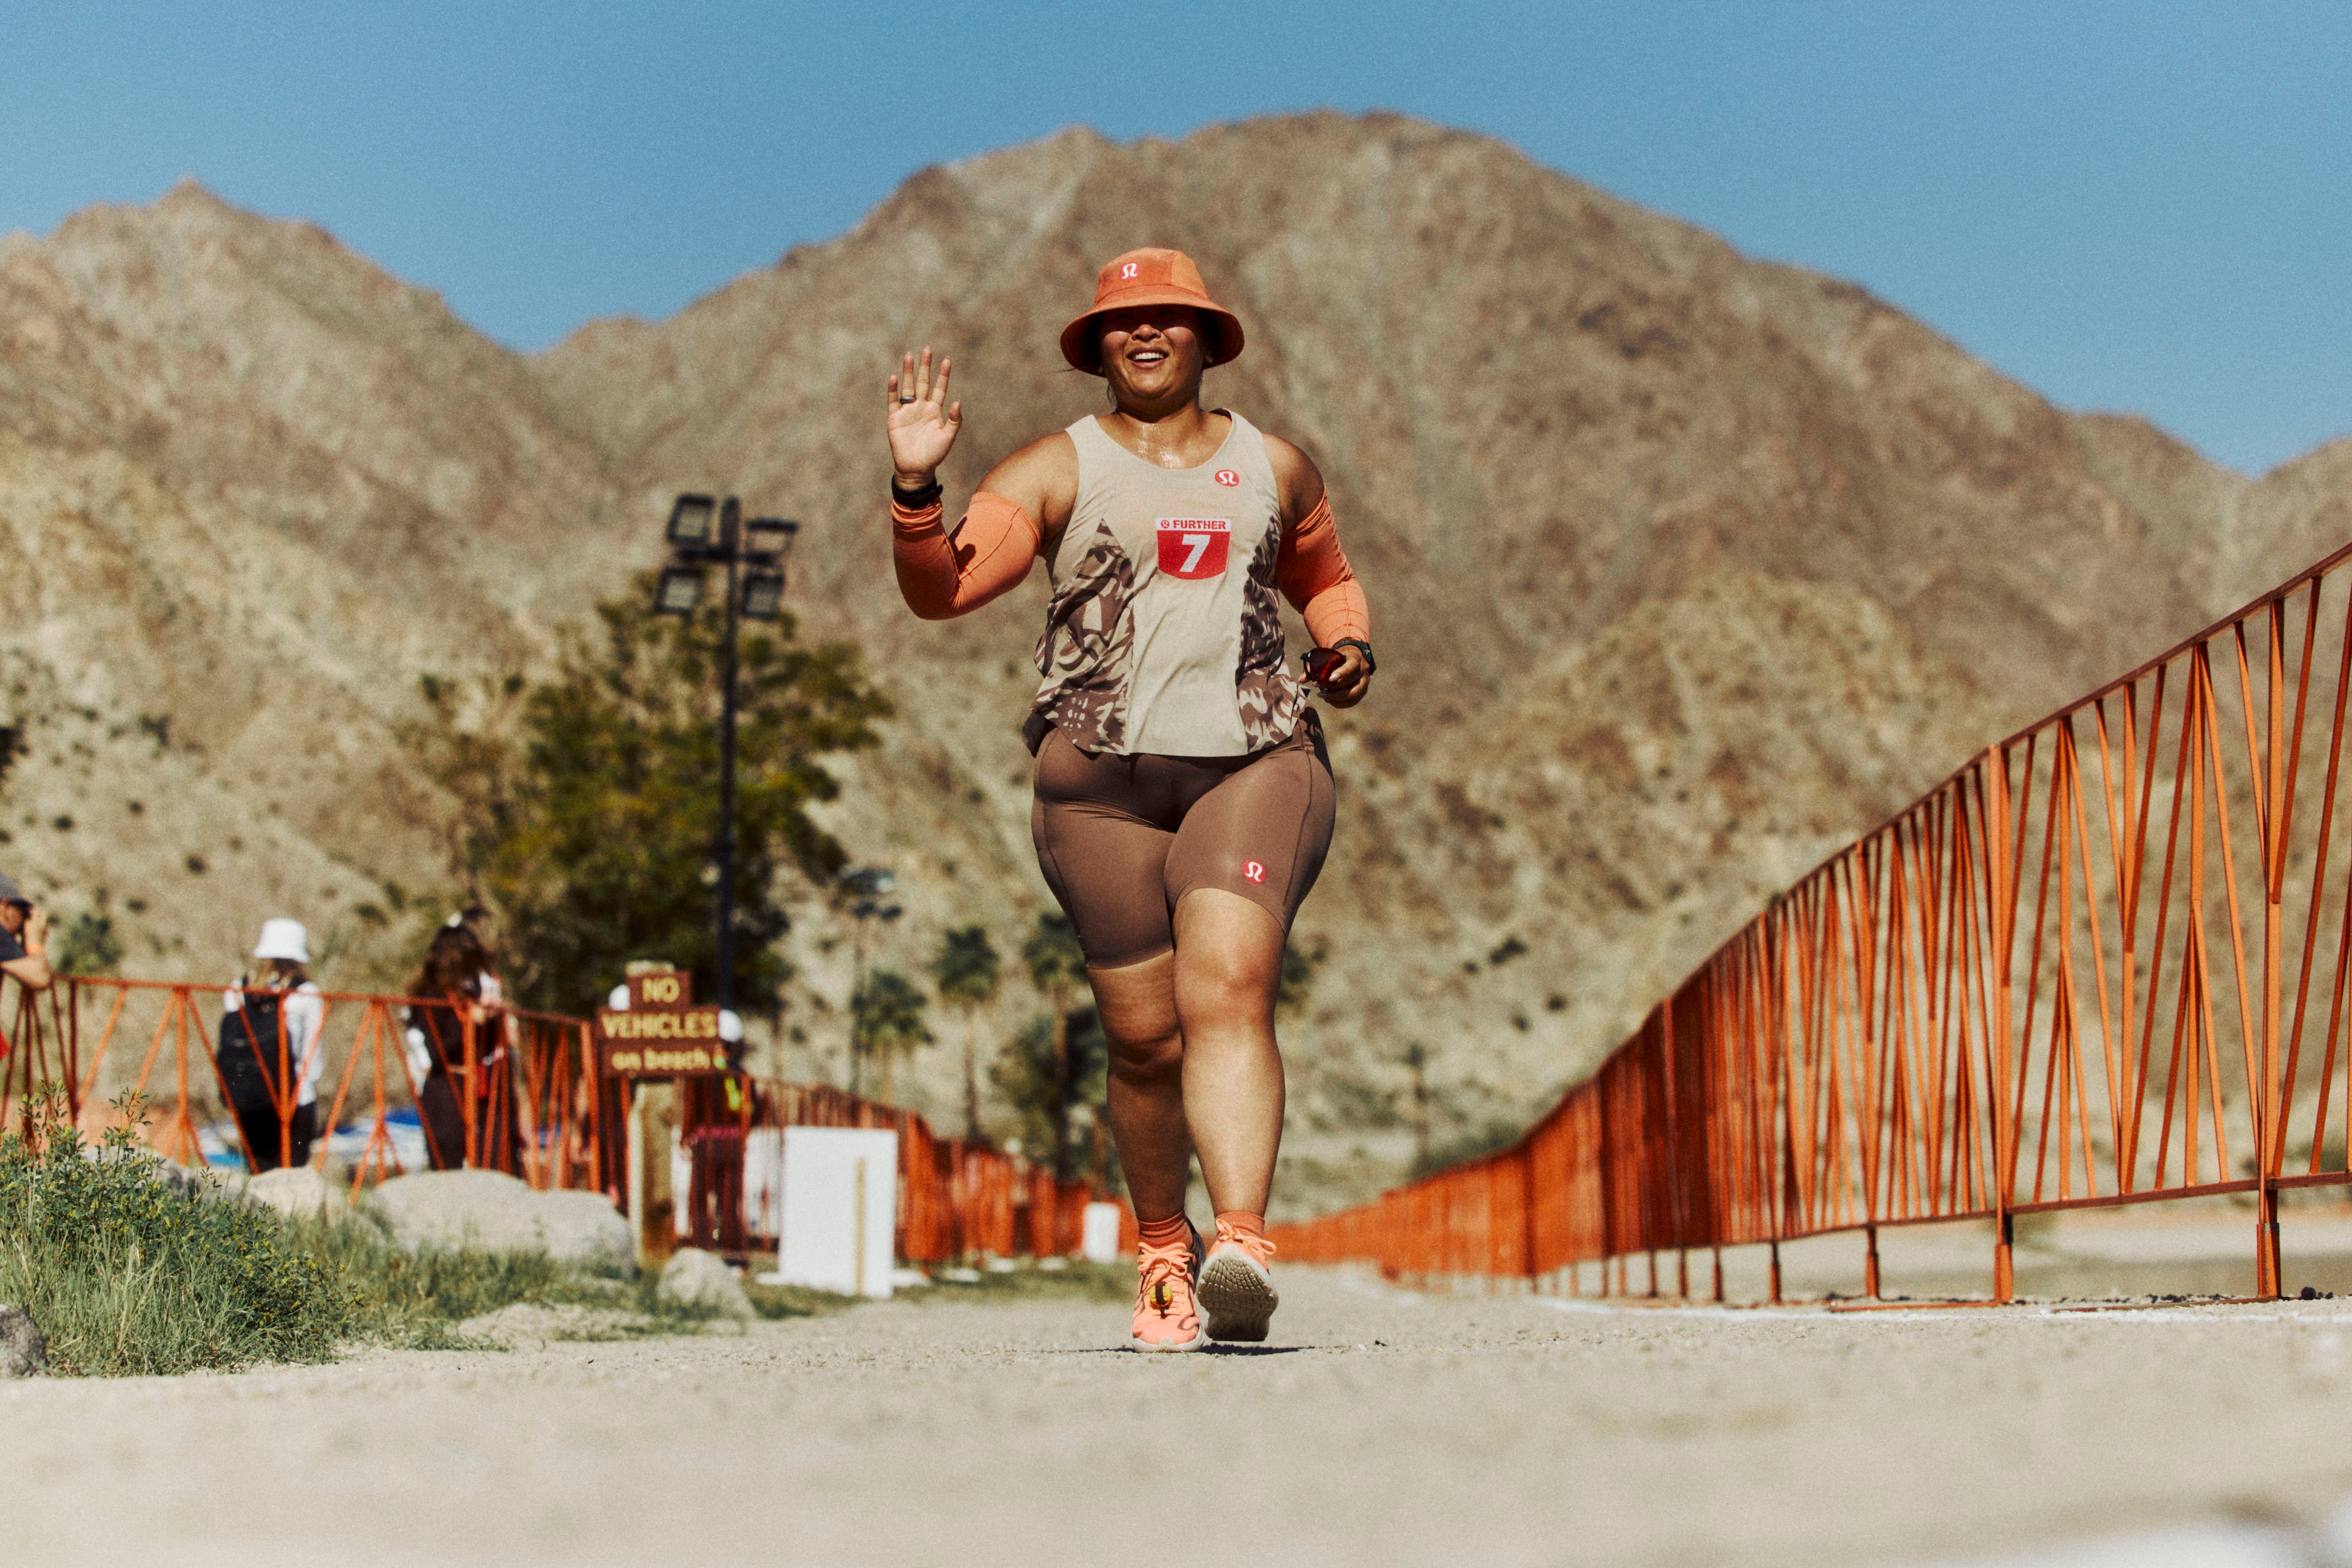 Hong Kong’s Vriko Kwok at Further, which backed 10 female athletes from around the world to run their farthest distance over six days. Photo: Lululemon